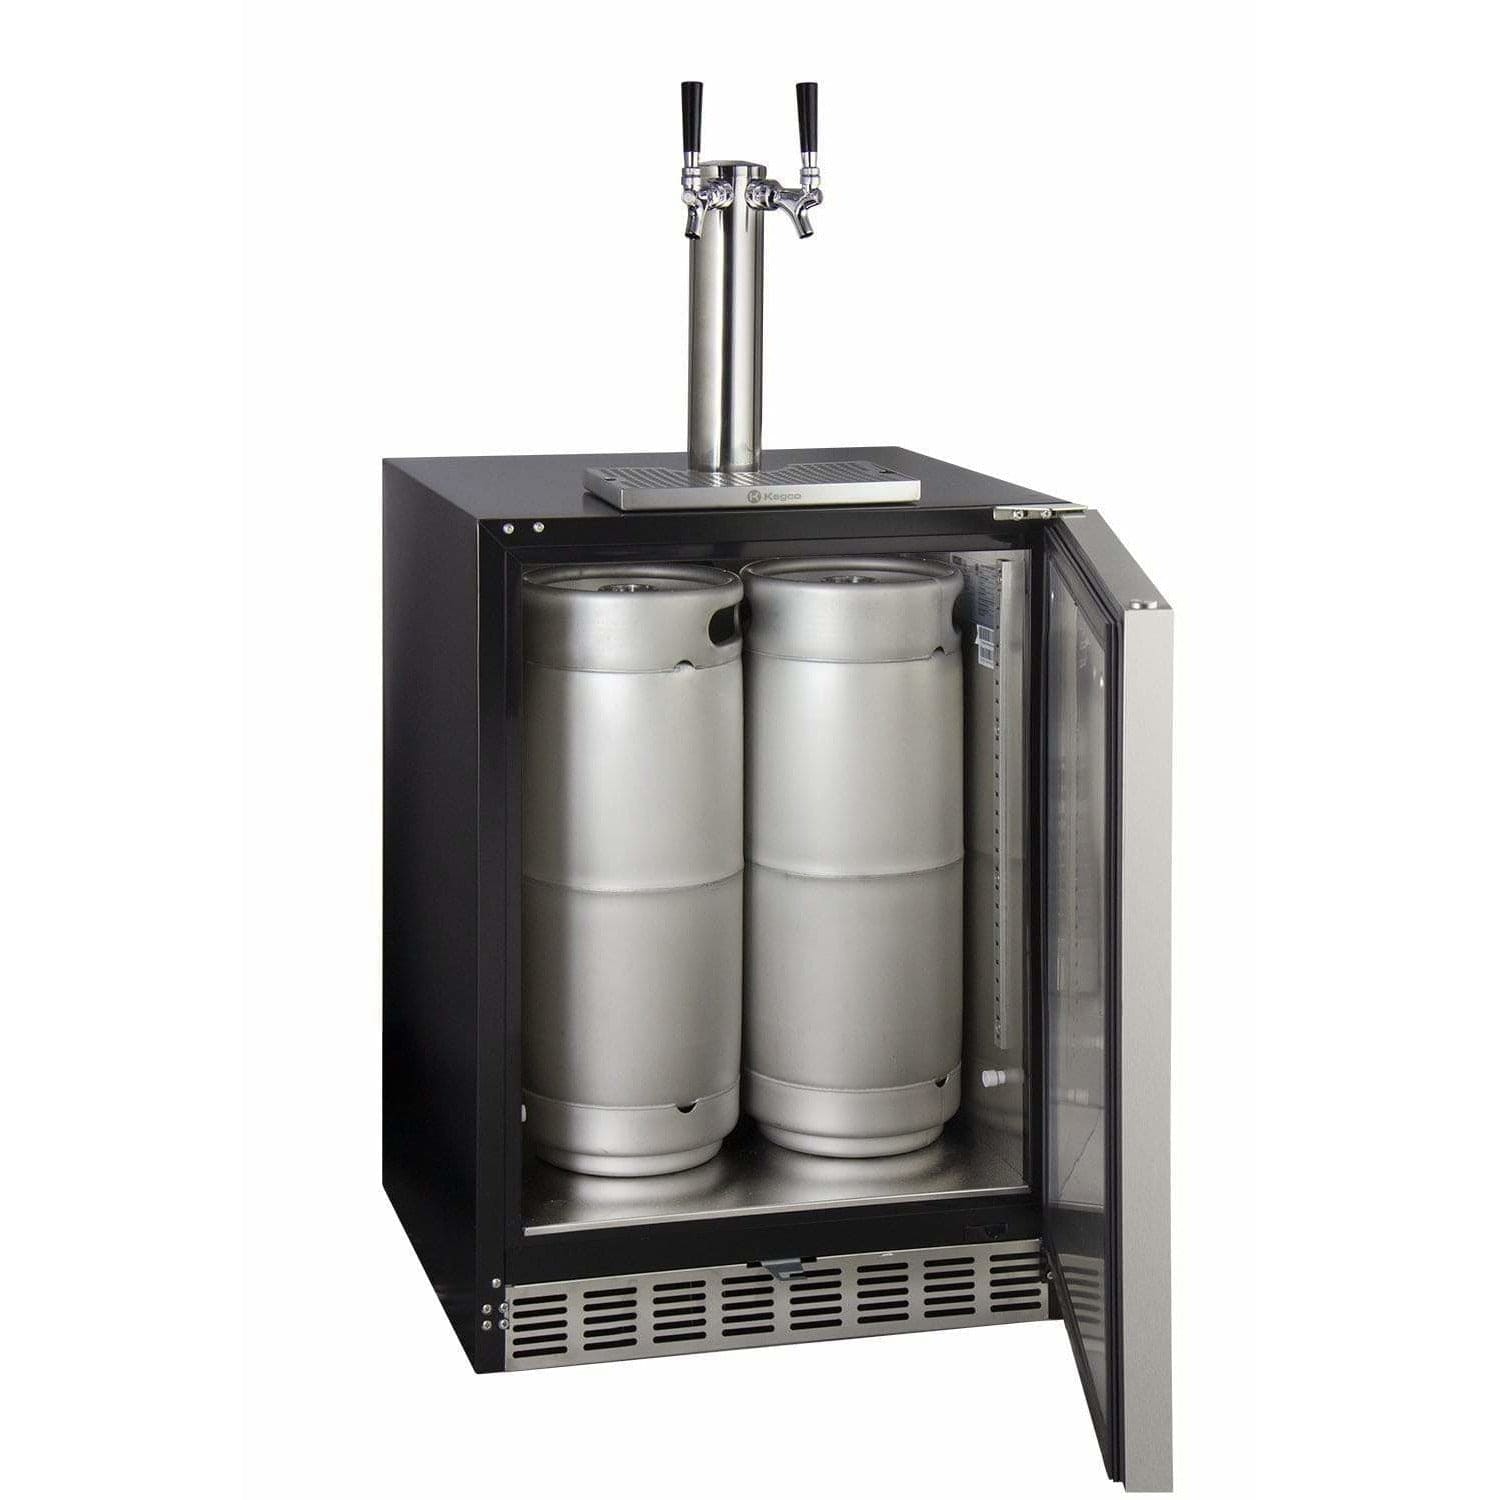 Kegco 24" Wide Dual Tap Stainless Steel Right Hinge Built-in ADA with Kit Kegerator HK48BSA-2 Wine Coolers Empire